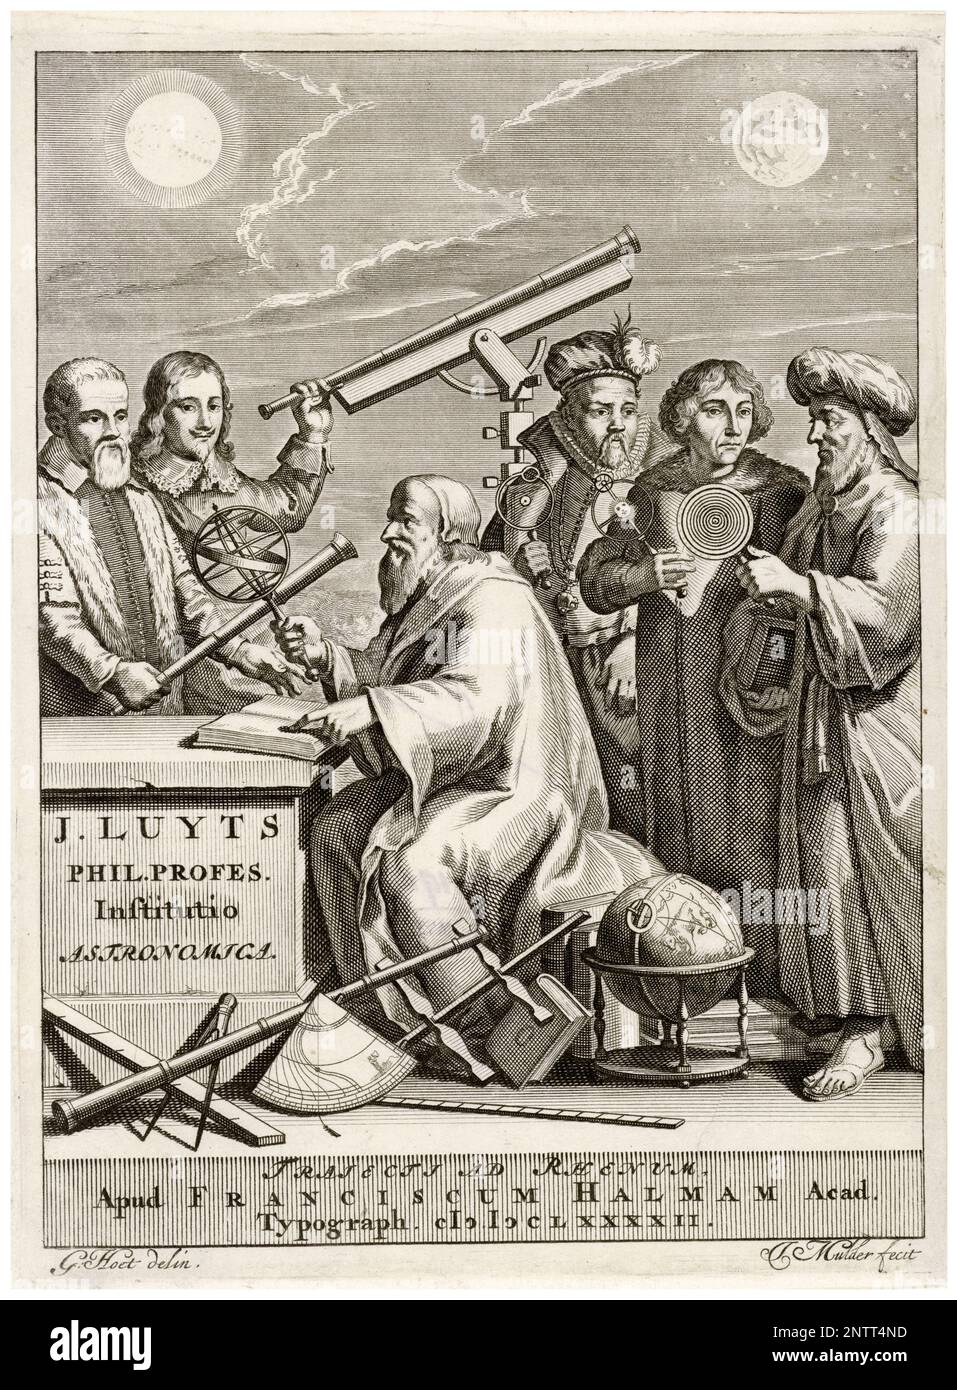 The Astronomers Galileo Galilei, Johannes Hevelius, Tycho Brahe, Nicholas Copernicus and Claudius Ptolemy stand around the seated Hipparchus, the classical founder of Astronomy, engraving by Joseph Mulder after Gerard Hoet, 1692 Stock Photo